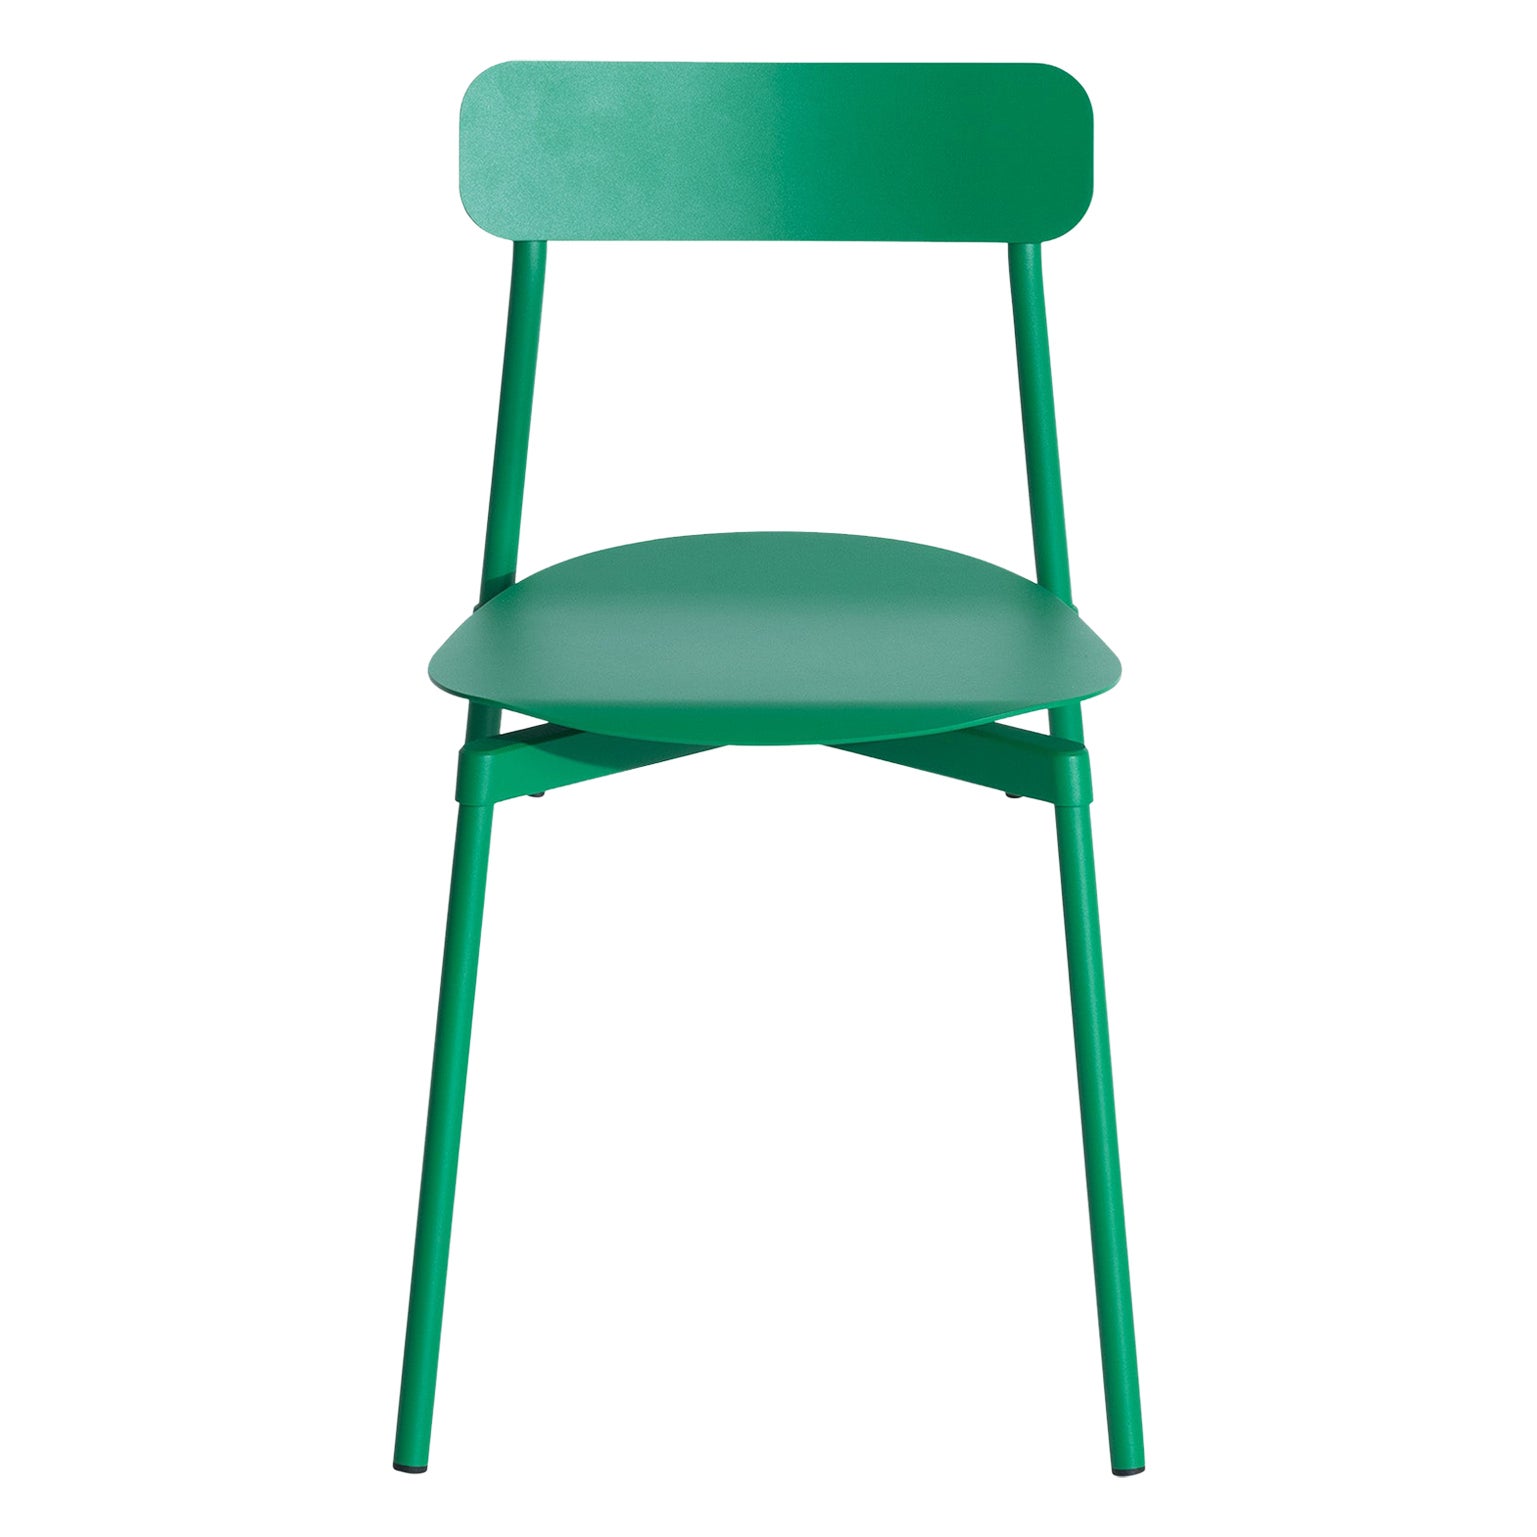 Petite Friture Fromme Chair in Mint-Green Aluminium by Tom Chung, 2019 For Sale